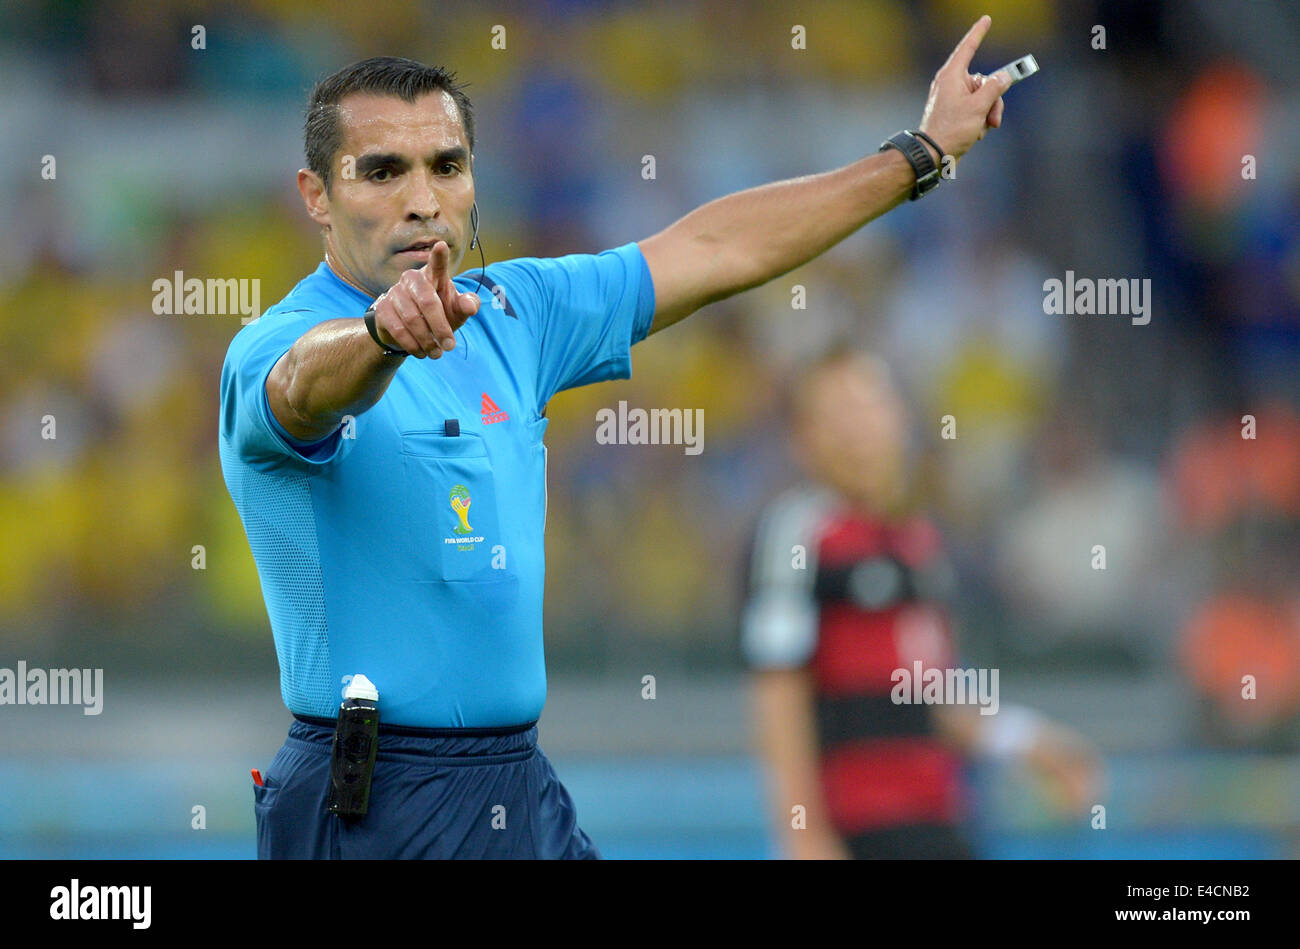 Belo Horizonte, Brazil. 08th July, 2014. Referee Marco Rodriguez of Mexico gestures during the FIFA World Cup 2014 semi-final soccer match between Brazil and Germany at Estadio Mineirao in Belo Horizonte, Brazil, 08 July 2014. Photo: Thomas Eisenhuth/dpa/Alamy Live News Stock Photo